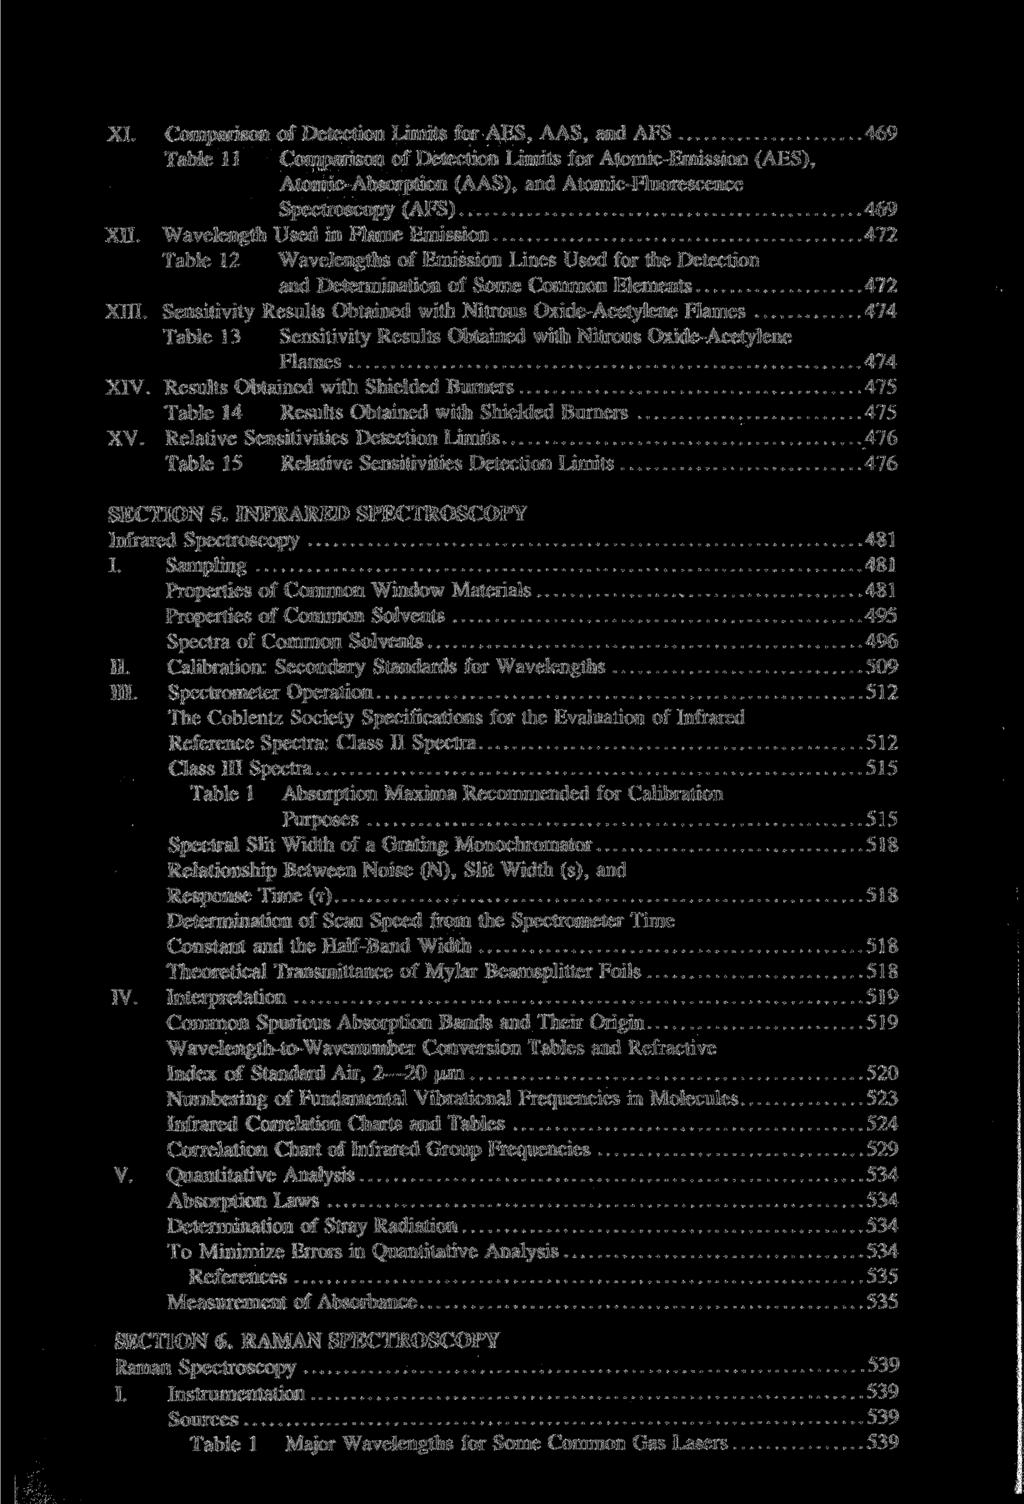 XI. Comparison of Detection Limits for AES, AAS, and AFS 469 Table 11 Comparison of Detection Limits for Atomic-Emission (AES), Atomic-Absorption (AAS), and Atomic-Fluorescence Spectroscopy (AFS) 469